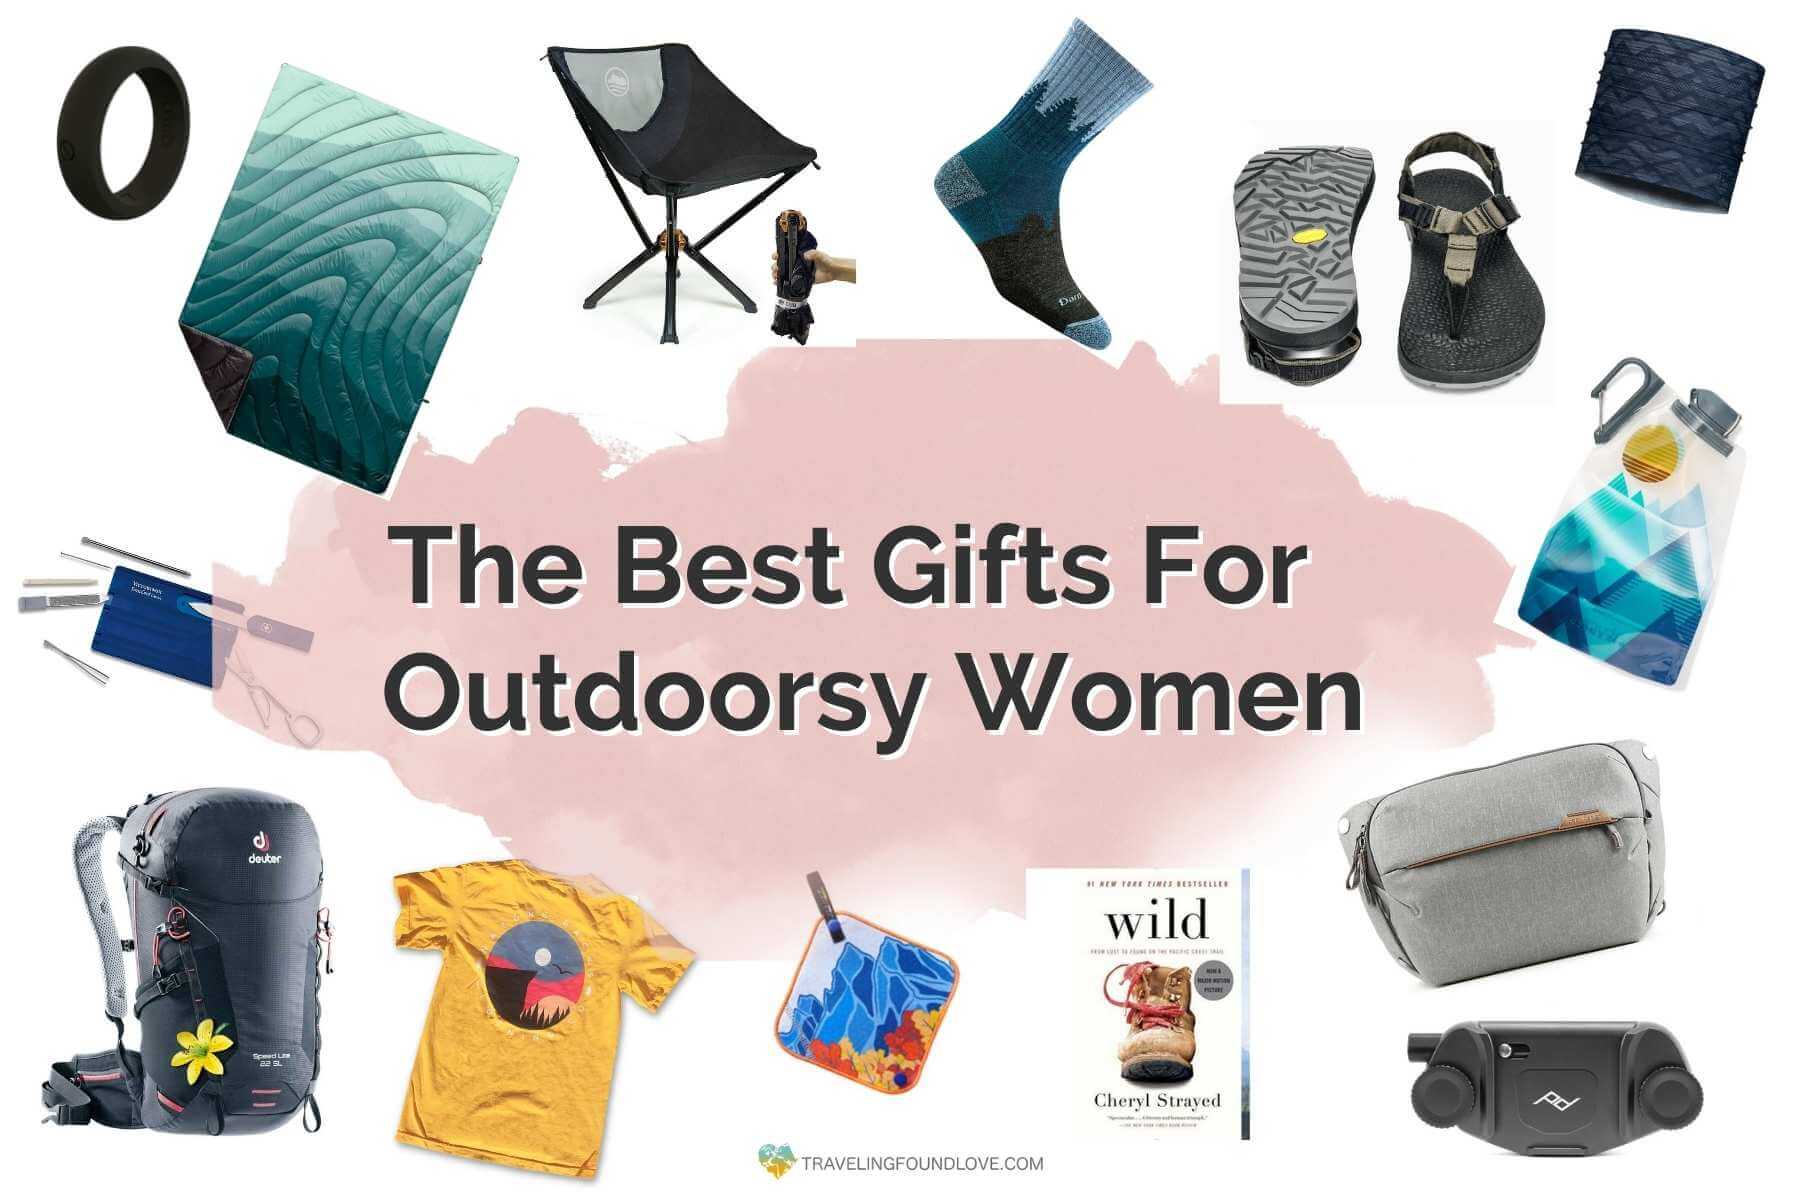 14 best gifts for outdoorsy women